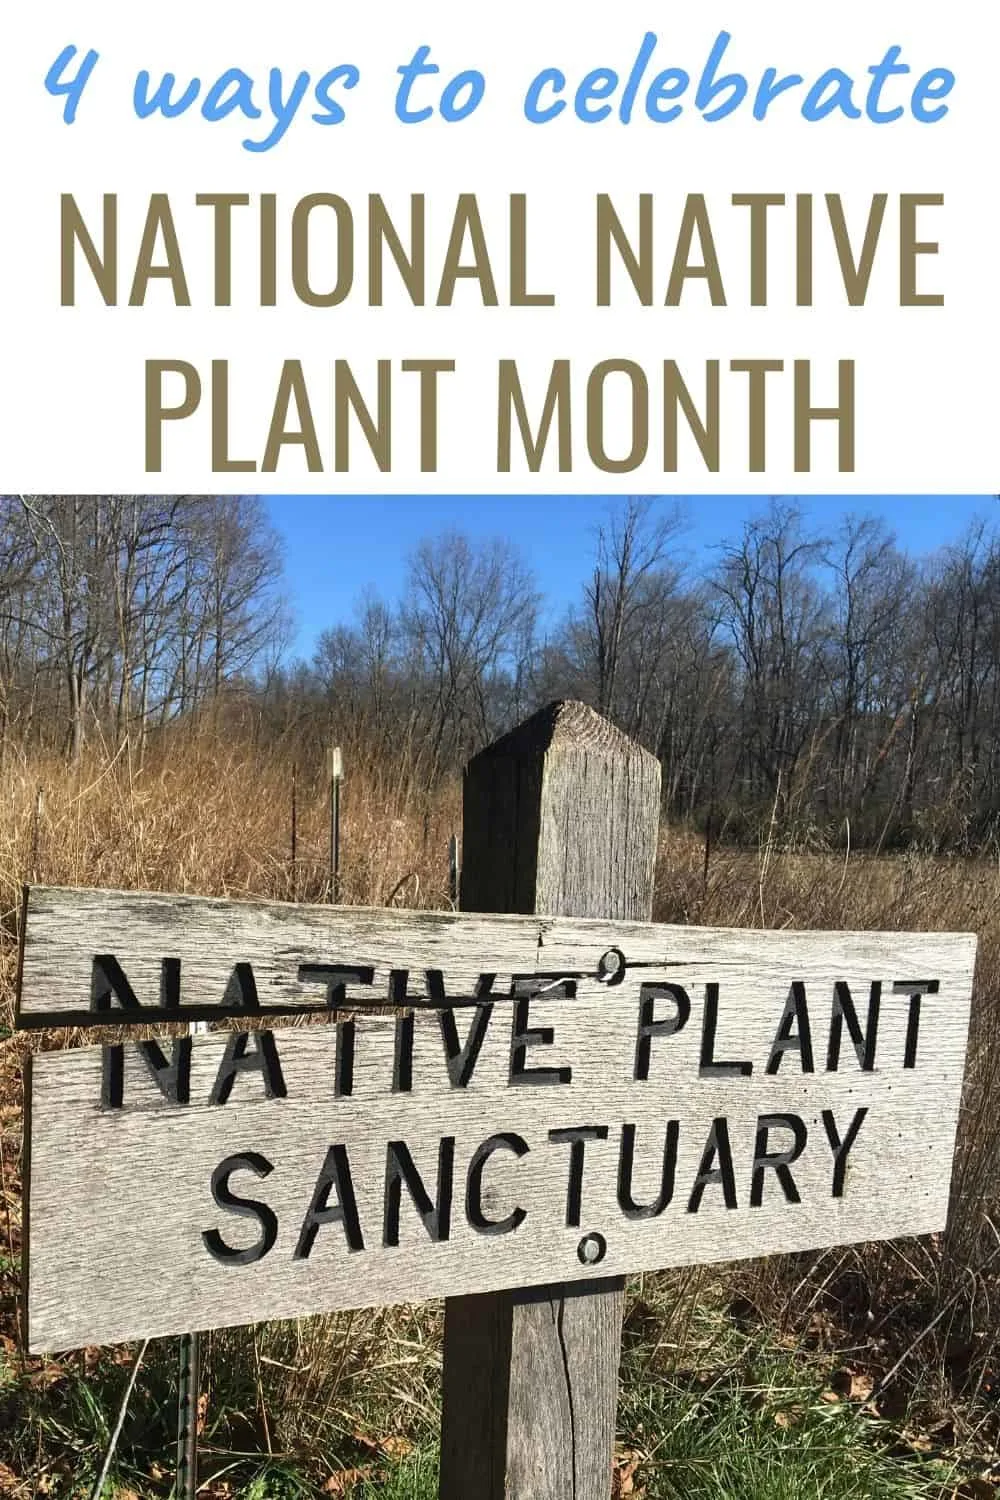 4 ways to celebrate National Native Plant Month